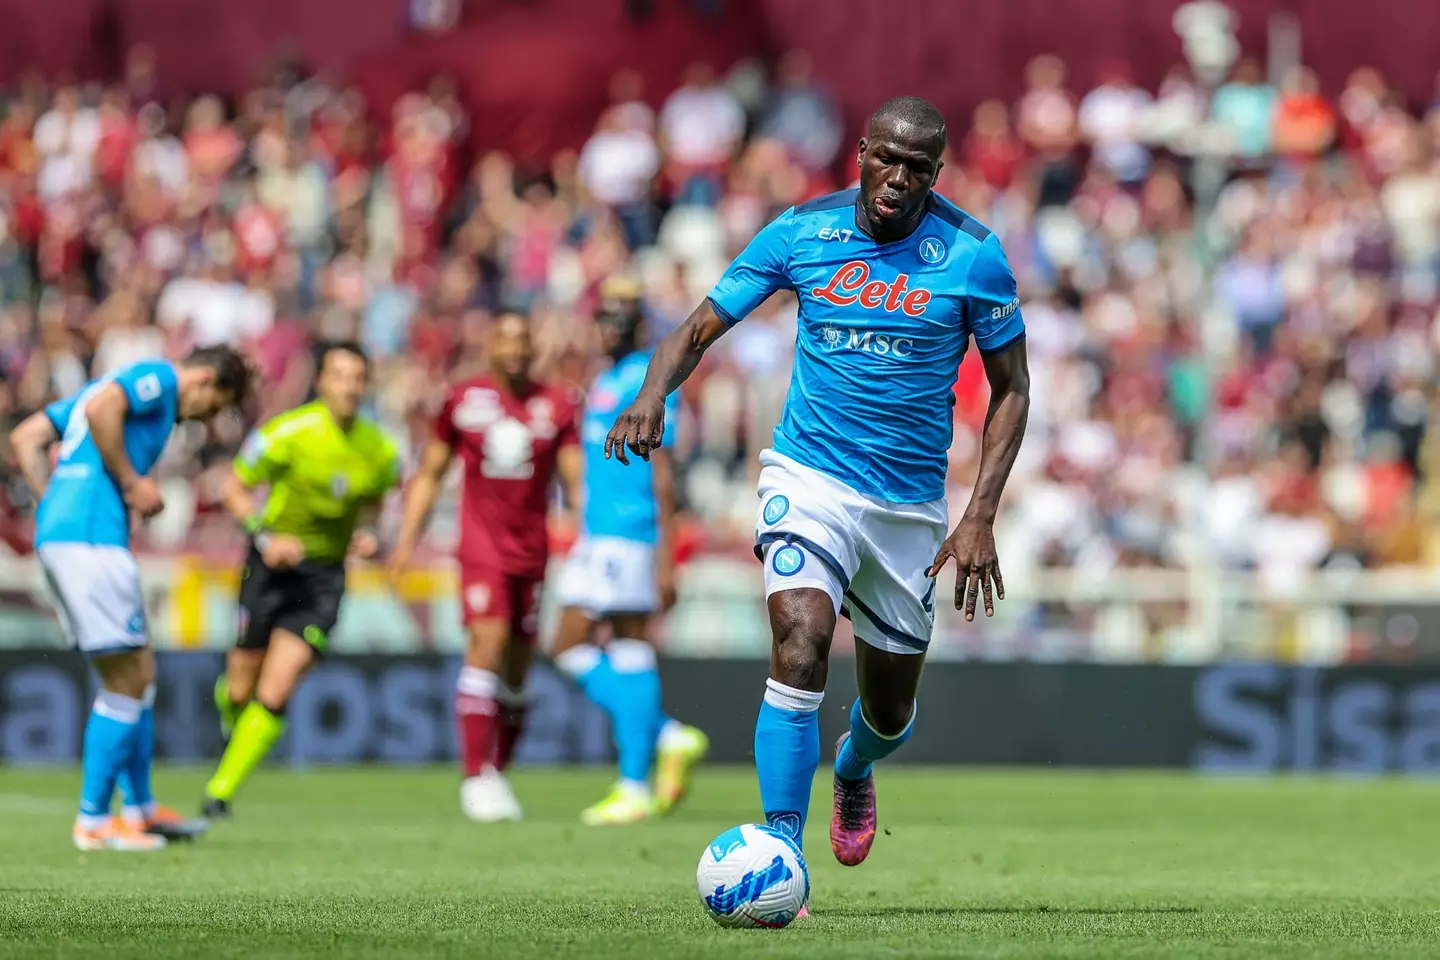 Kalidou Koulibaly of Napoli in action during the match against Torino. (Alamy)